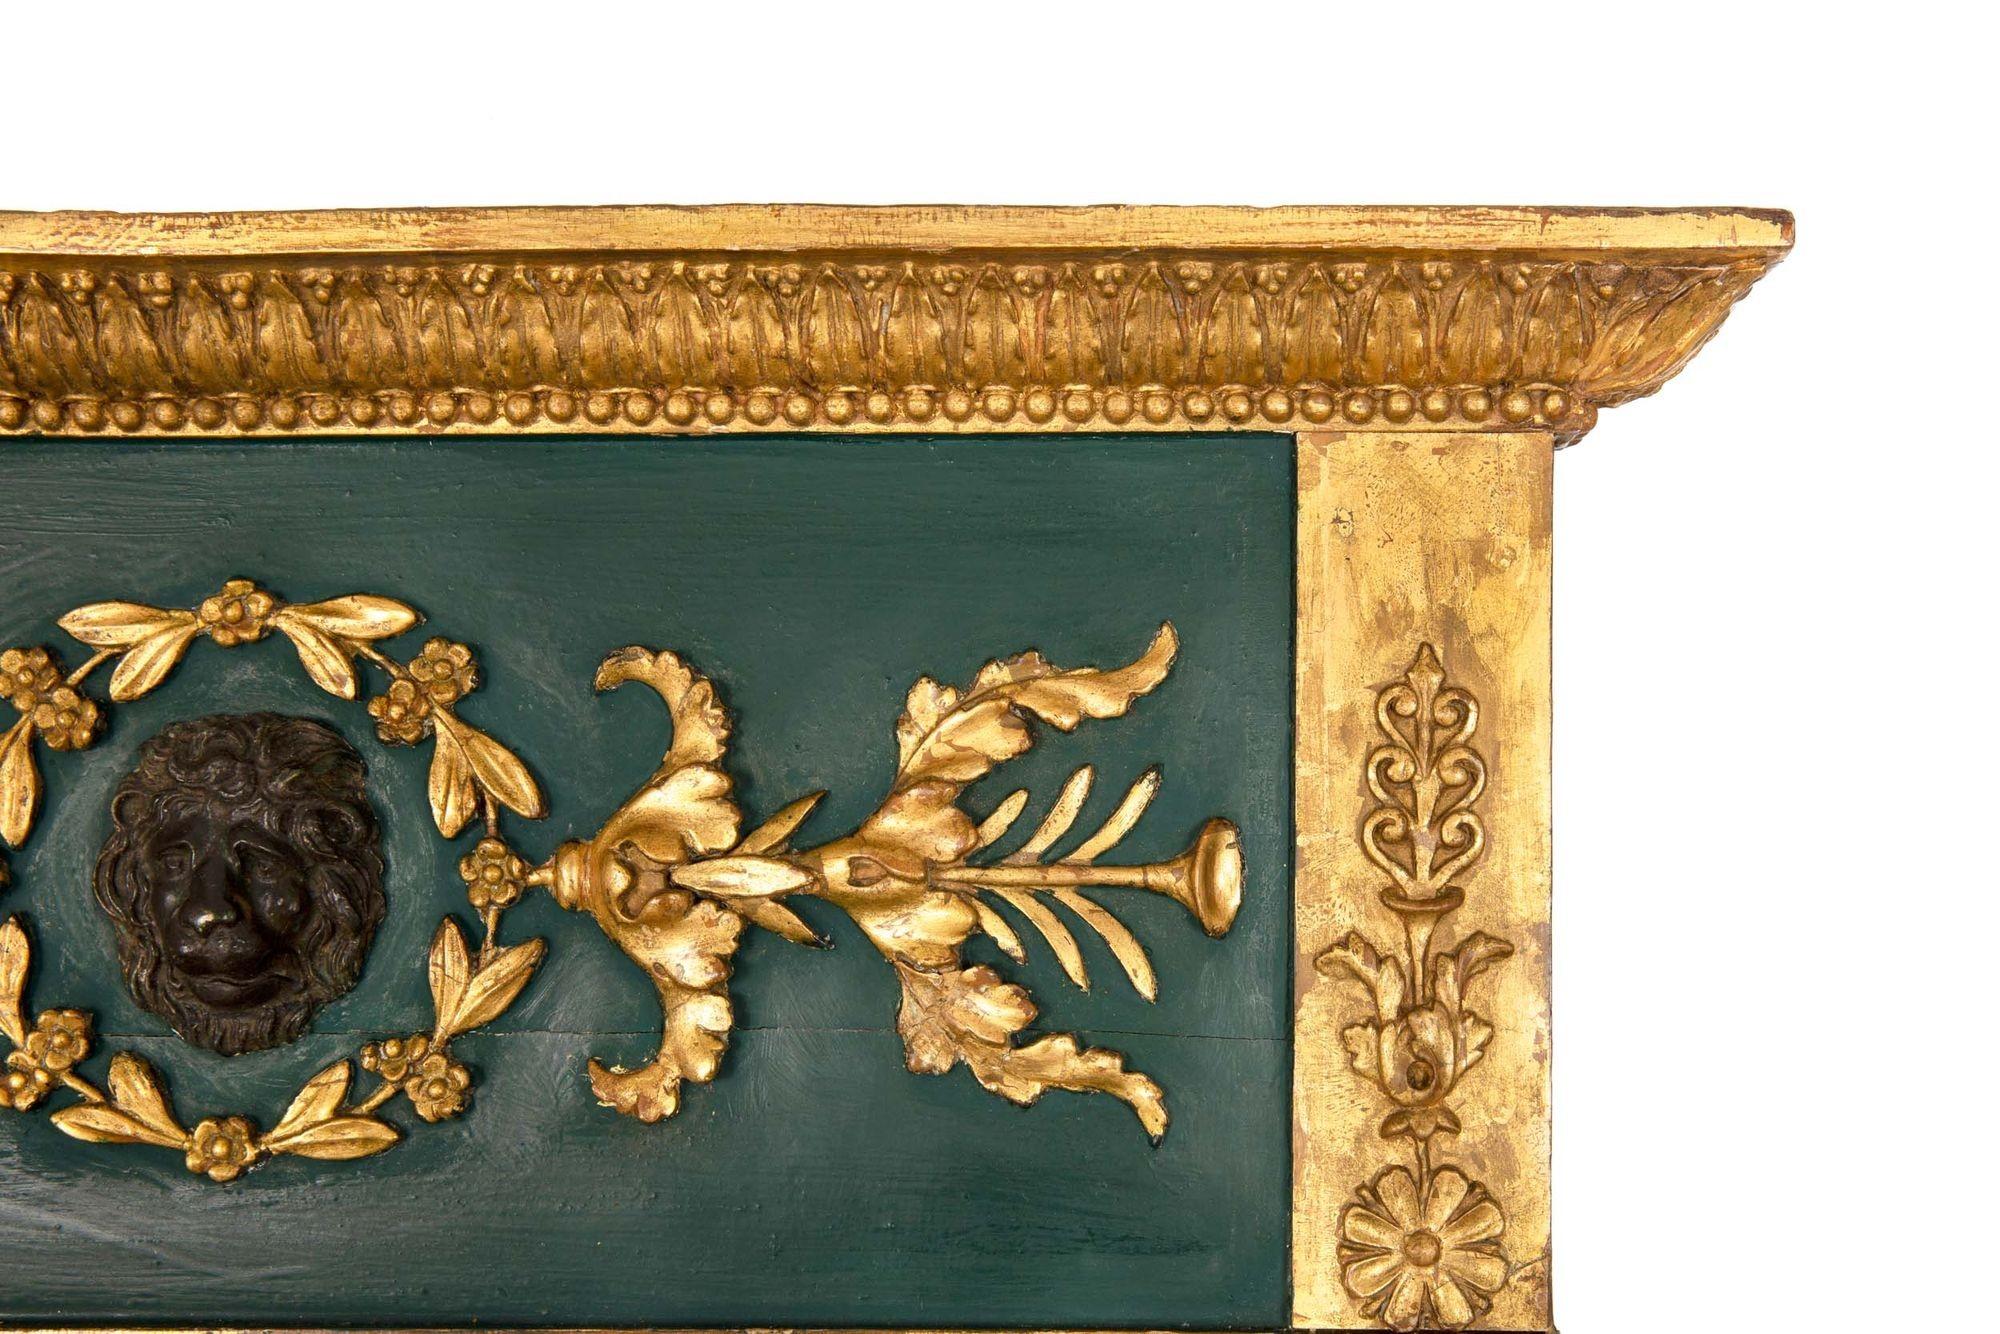 Regency Period Gilded Pier Mirror with Lion’s Mask, early 19th century In Good Condition For Sale In Shippensburg, PA